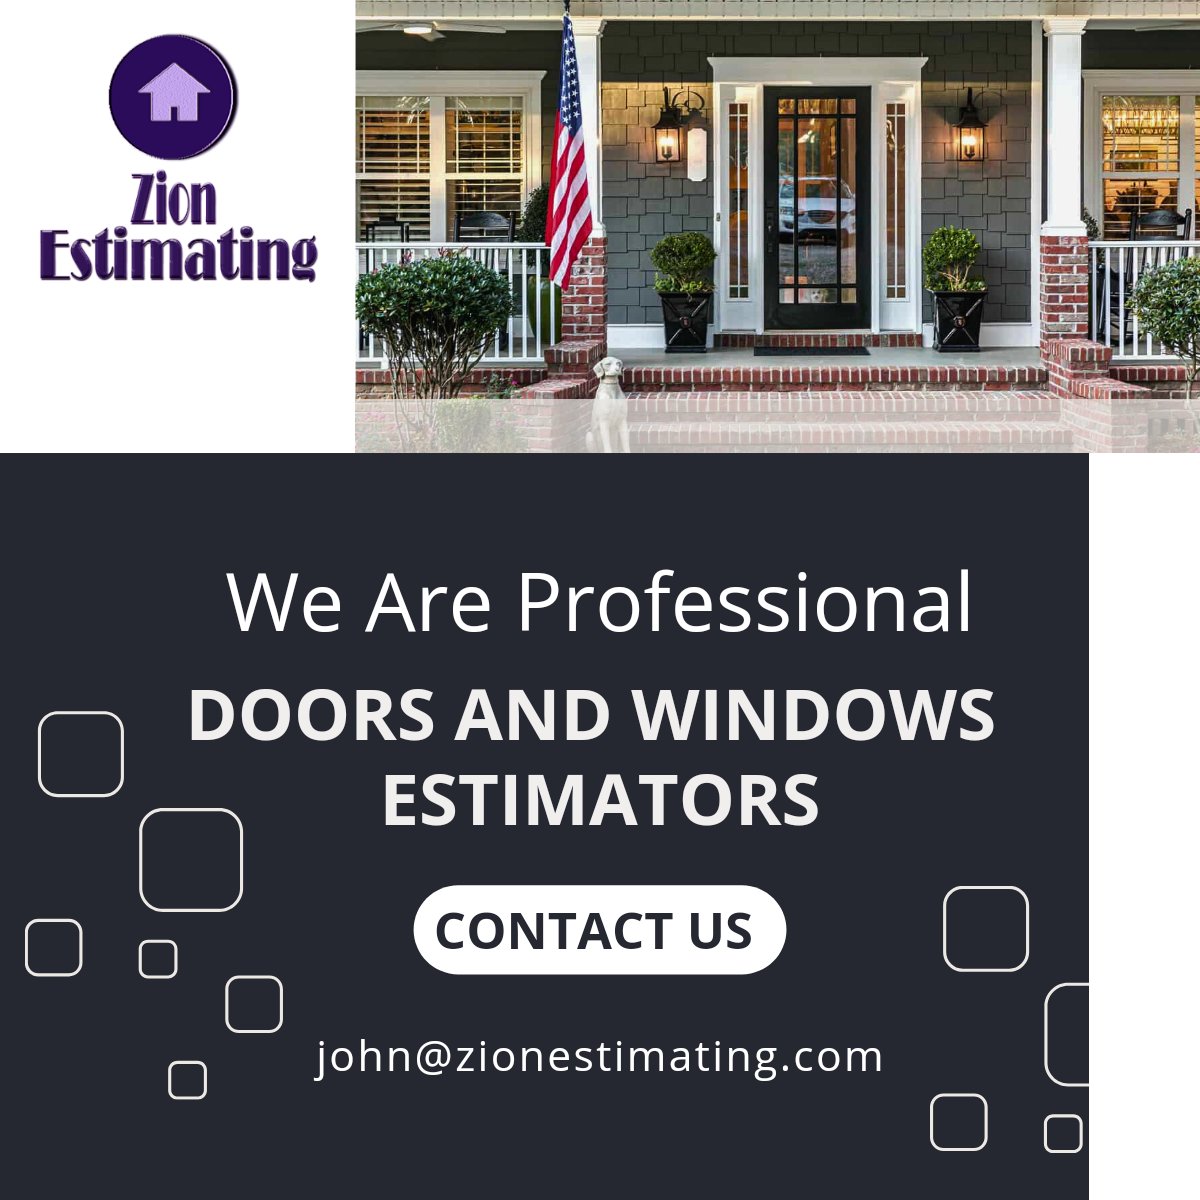 🔍 Exciting news Zion Estimating Services Inc! 

📊 Need accurate estimates for your upcoming projects?
Our dedicated team of professional estimators

🚪🪟 Whether it's a new bid or ongoing project, we follow CSI Division 

#estimatingservices #WindowsAndDoors #accurateestimates